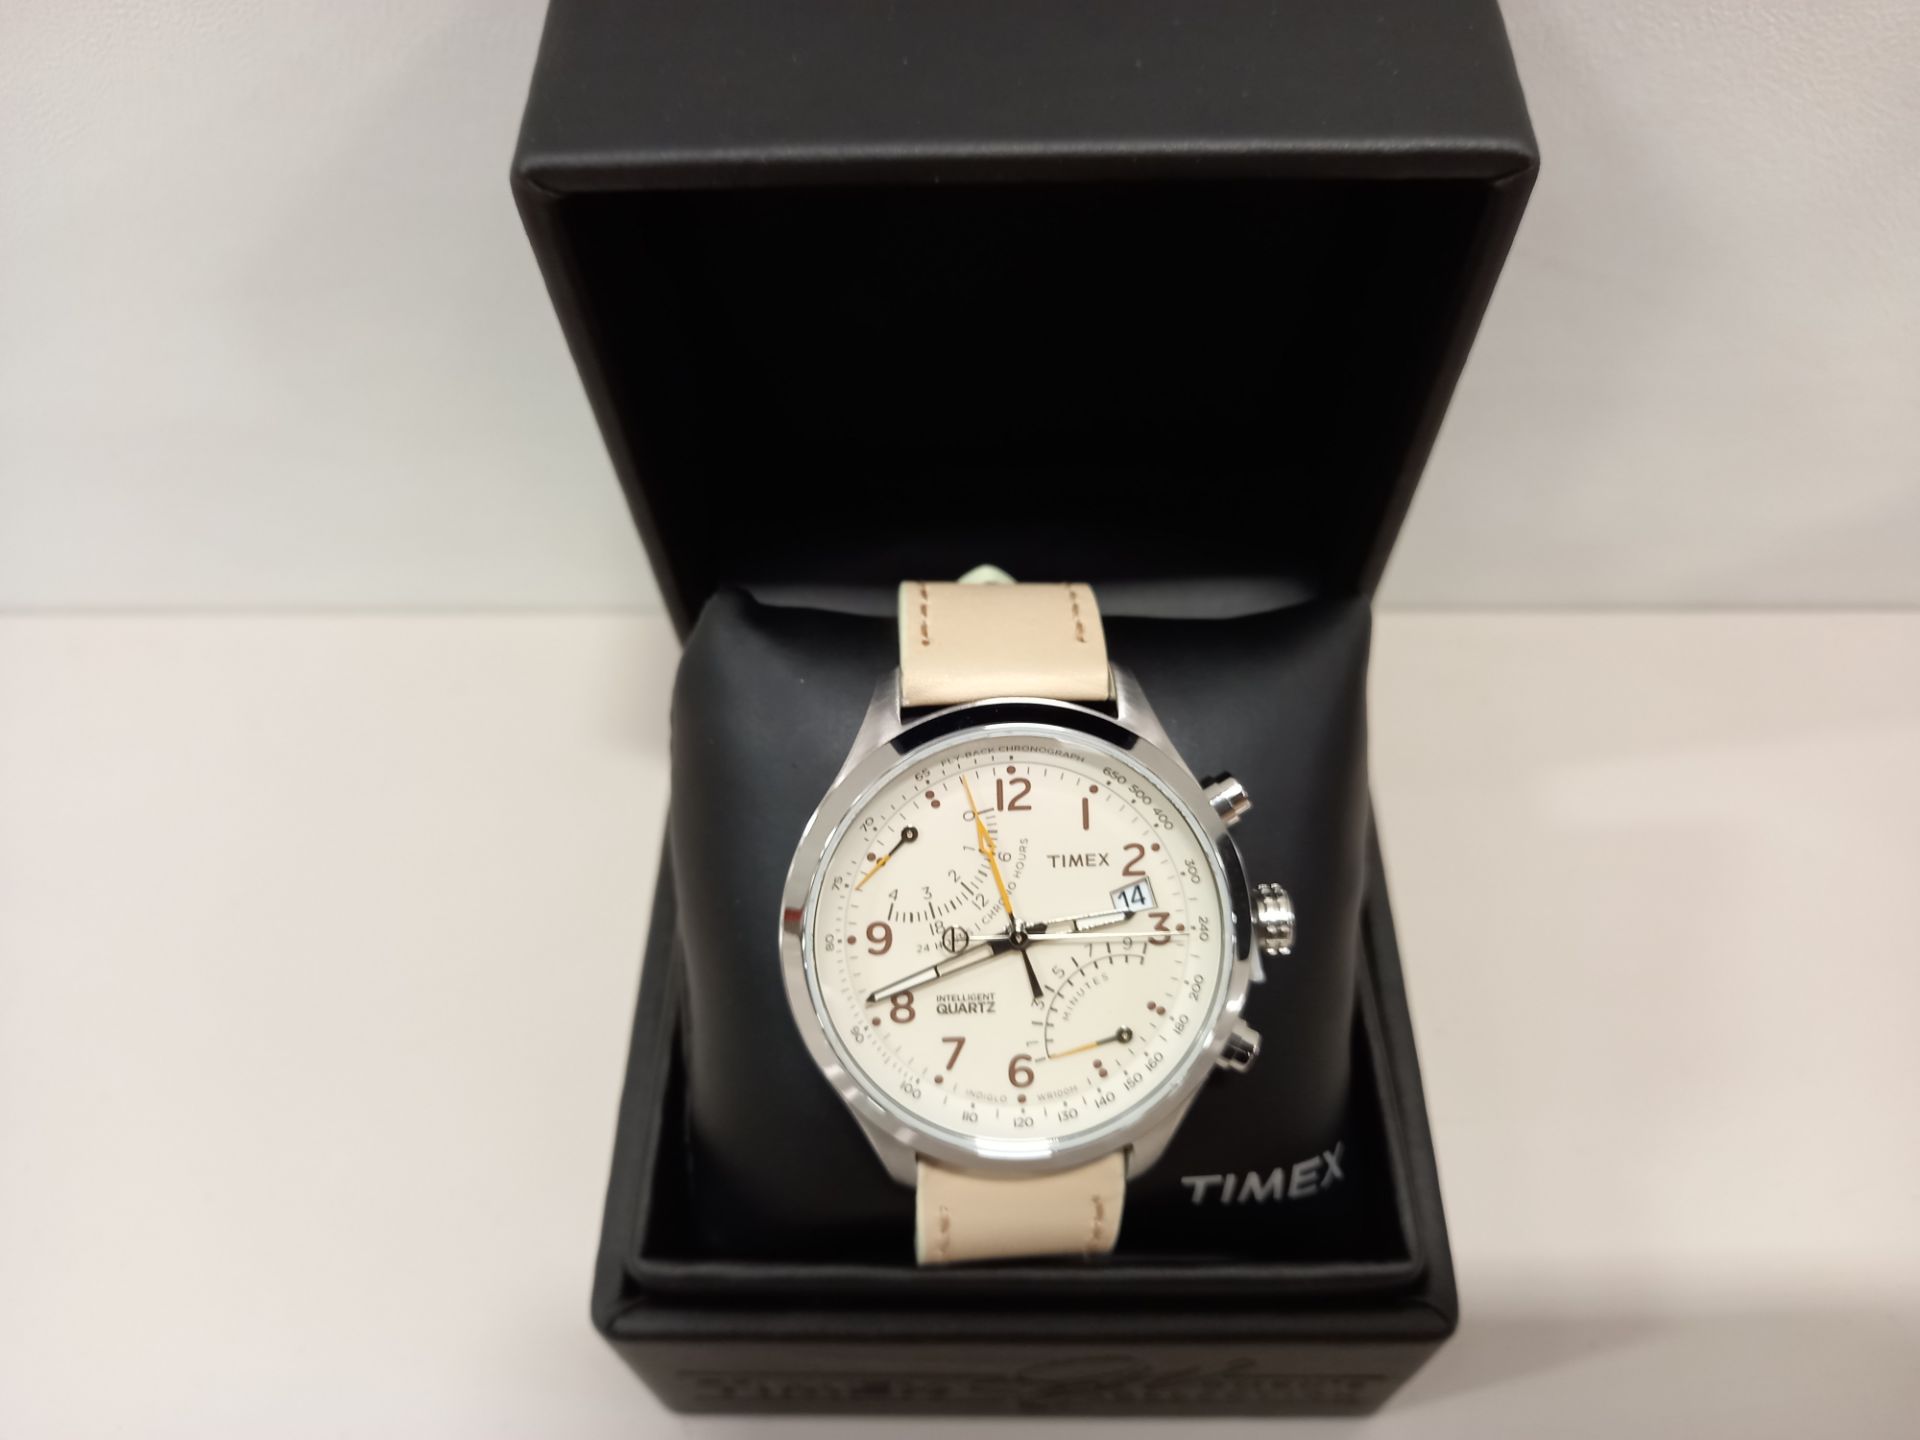 3 X BRAND NEW TIMEX WOMEN'S COLLECTION CREAM WATCHES RRP £139.99 EACH - TOTAL £419.97 BOXED GIFT &